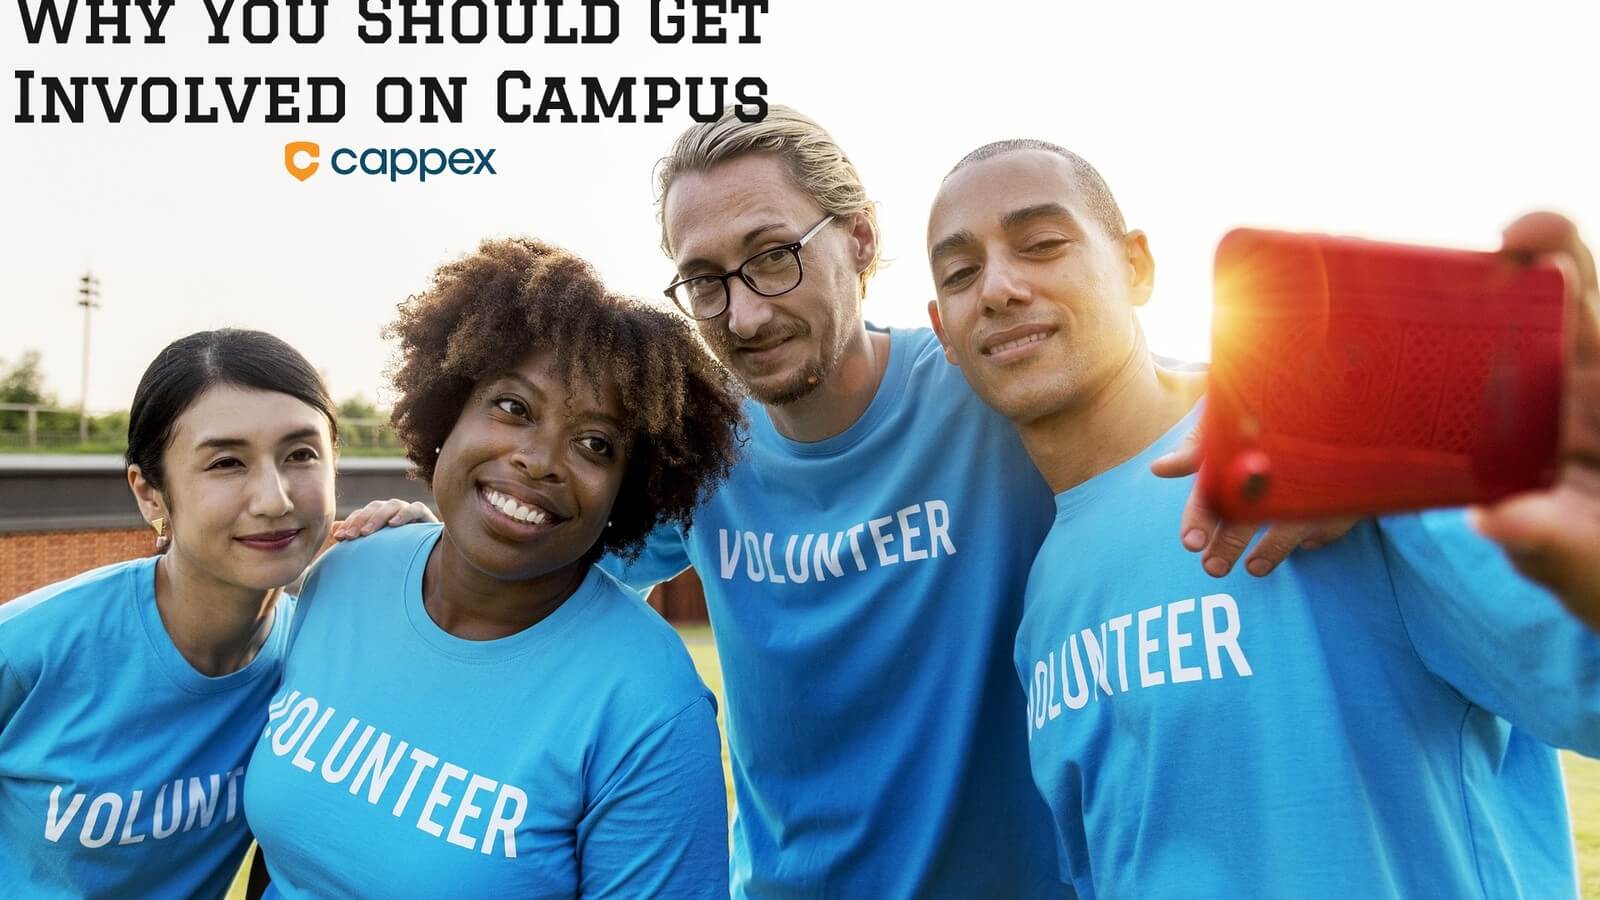 Why You Should Get Involved on Campus